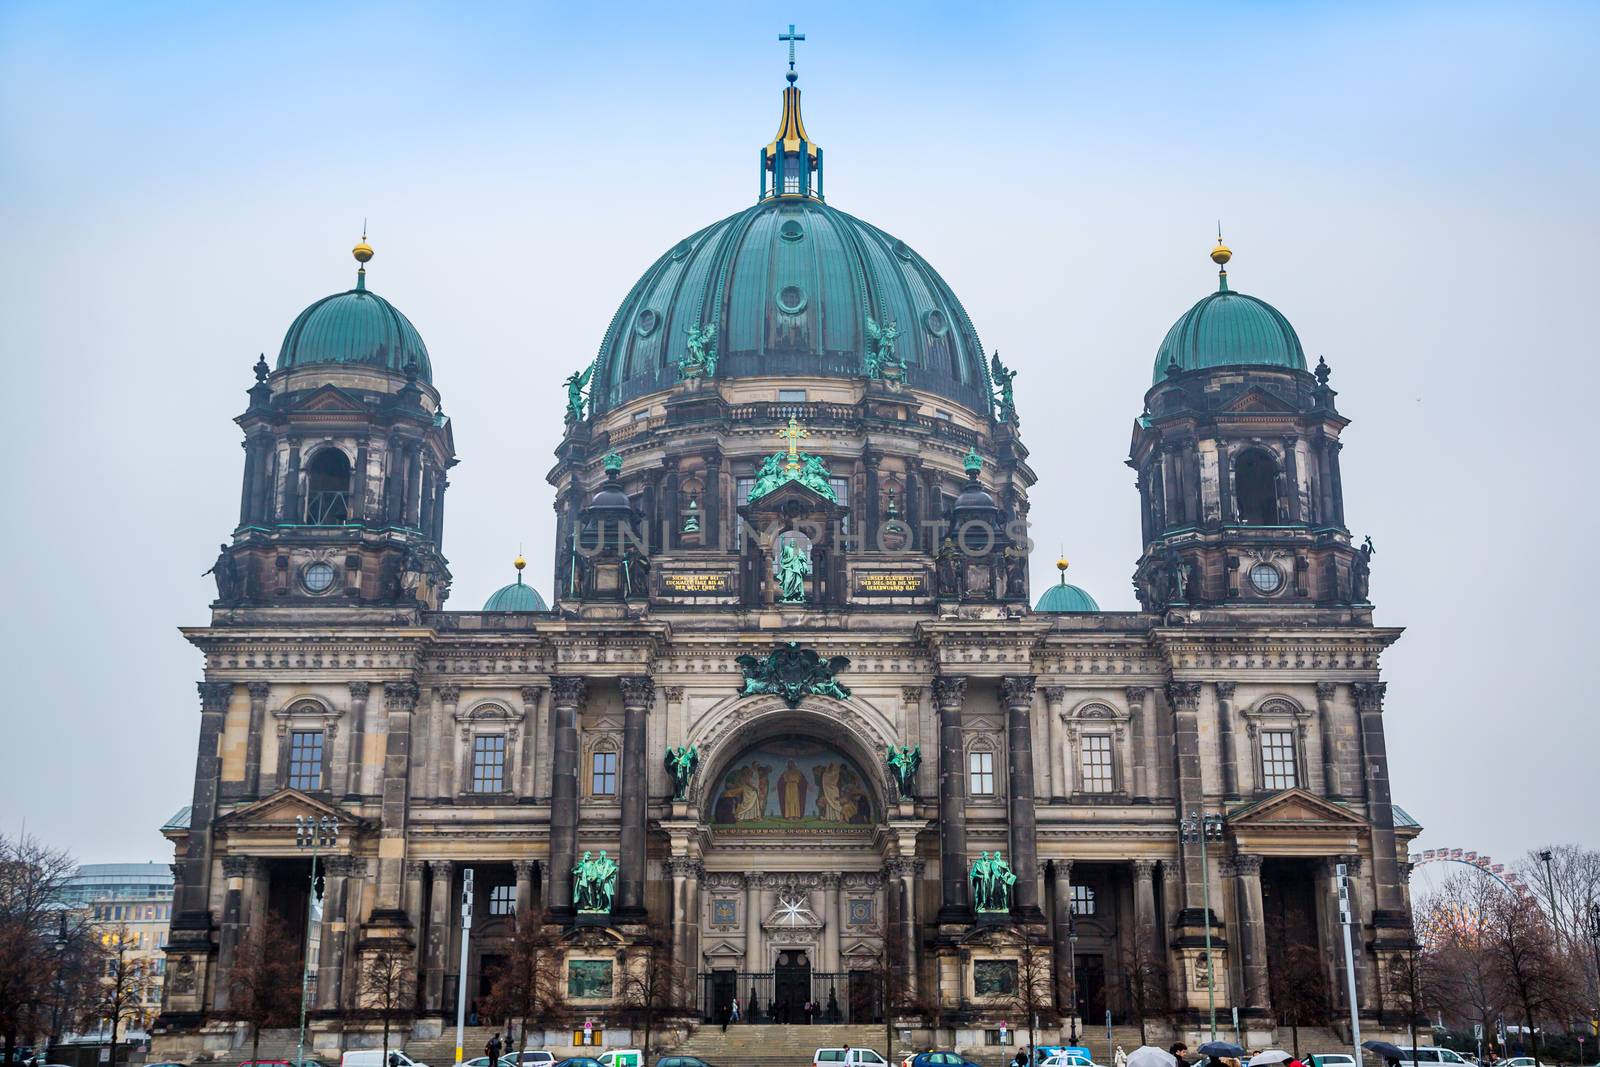 Berliner Dom, is the colloquial name for the Supreme Parish by bloodua